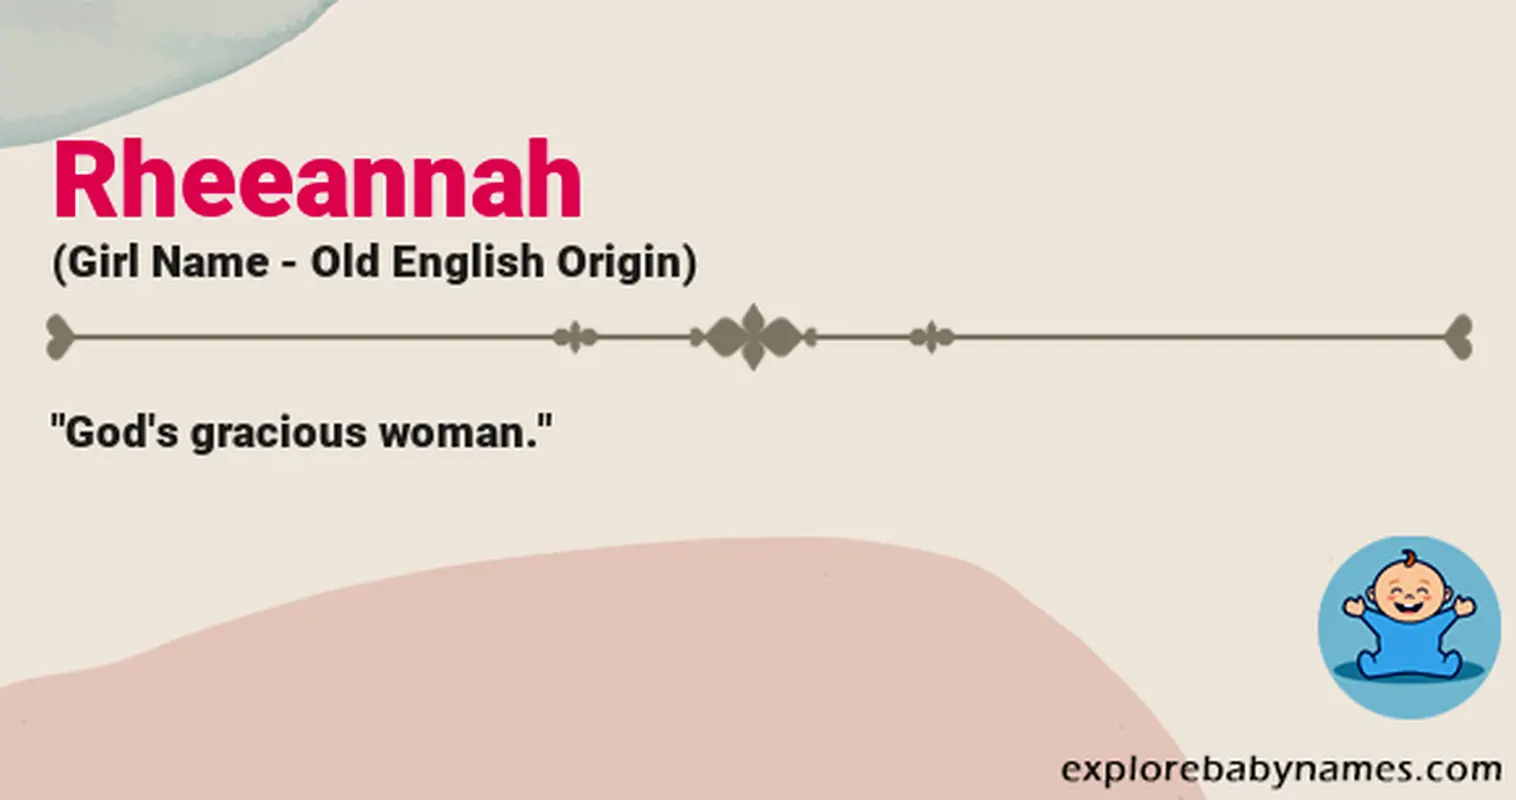 Meaning of Rheeannah